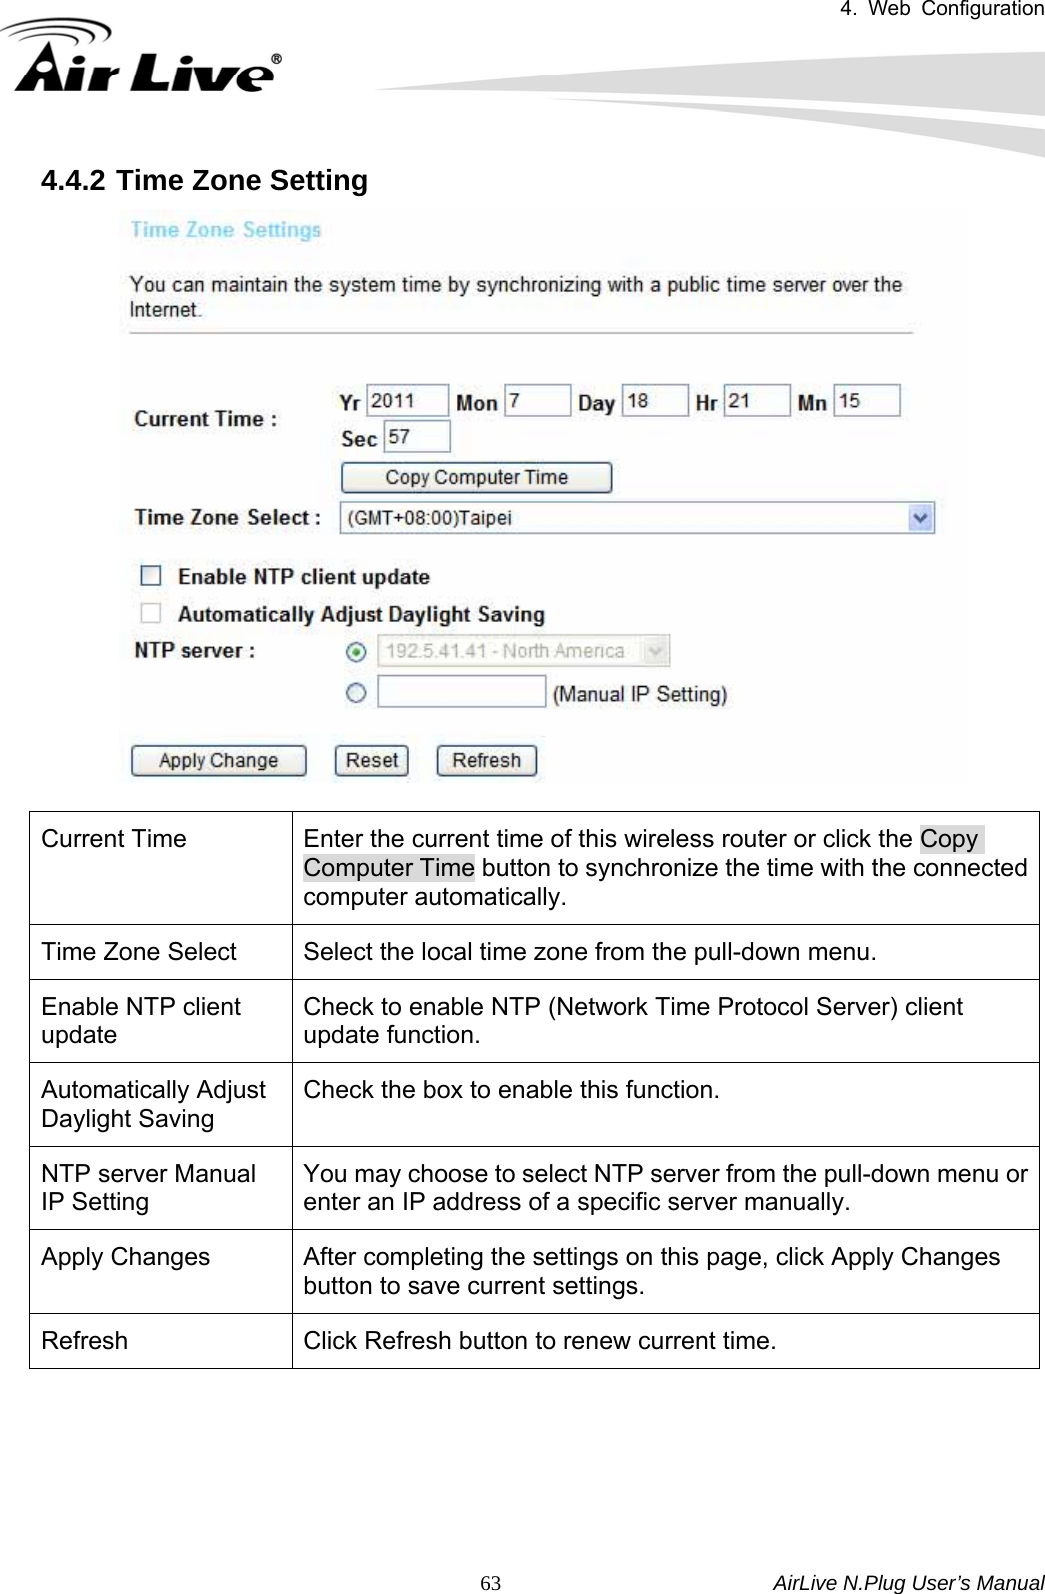 4. Web Configuration       AirLive N.Plug User’s Manual  634.4.2 Time Zone Setting   Current Time  Enter the current time of this wireless router or click the Copy Computer Time button to synchronize the time with the connected computer automatically. Time Zone Select  Select the local time zone from the pull-down menu. Enable NTP client update Check to enable NTP (Network Time Protocol Server) client update function. Automatically Adjust Daylight Saving Check the box to enable this function. NTP server Manual IP Setting You may choose to select NTP server from the pull-down menu or enter an IP address of a specific server manually. Apply Changes  After completing the settings on this page, click Apply Changes button to save current settings. Refresh  Click Refresh button to renew current time.   